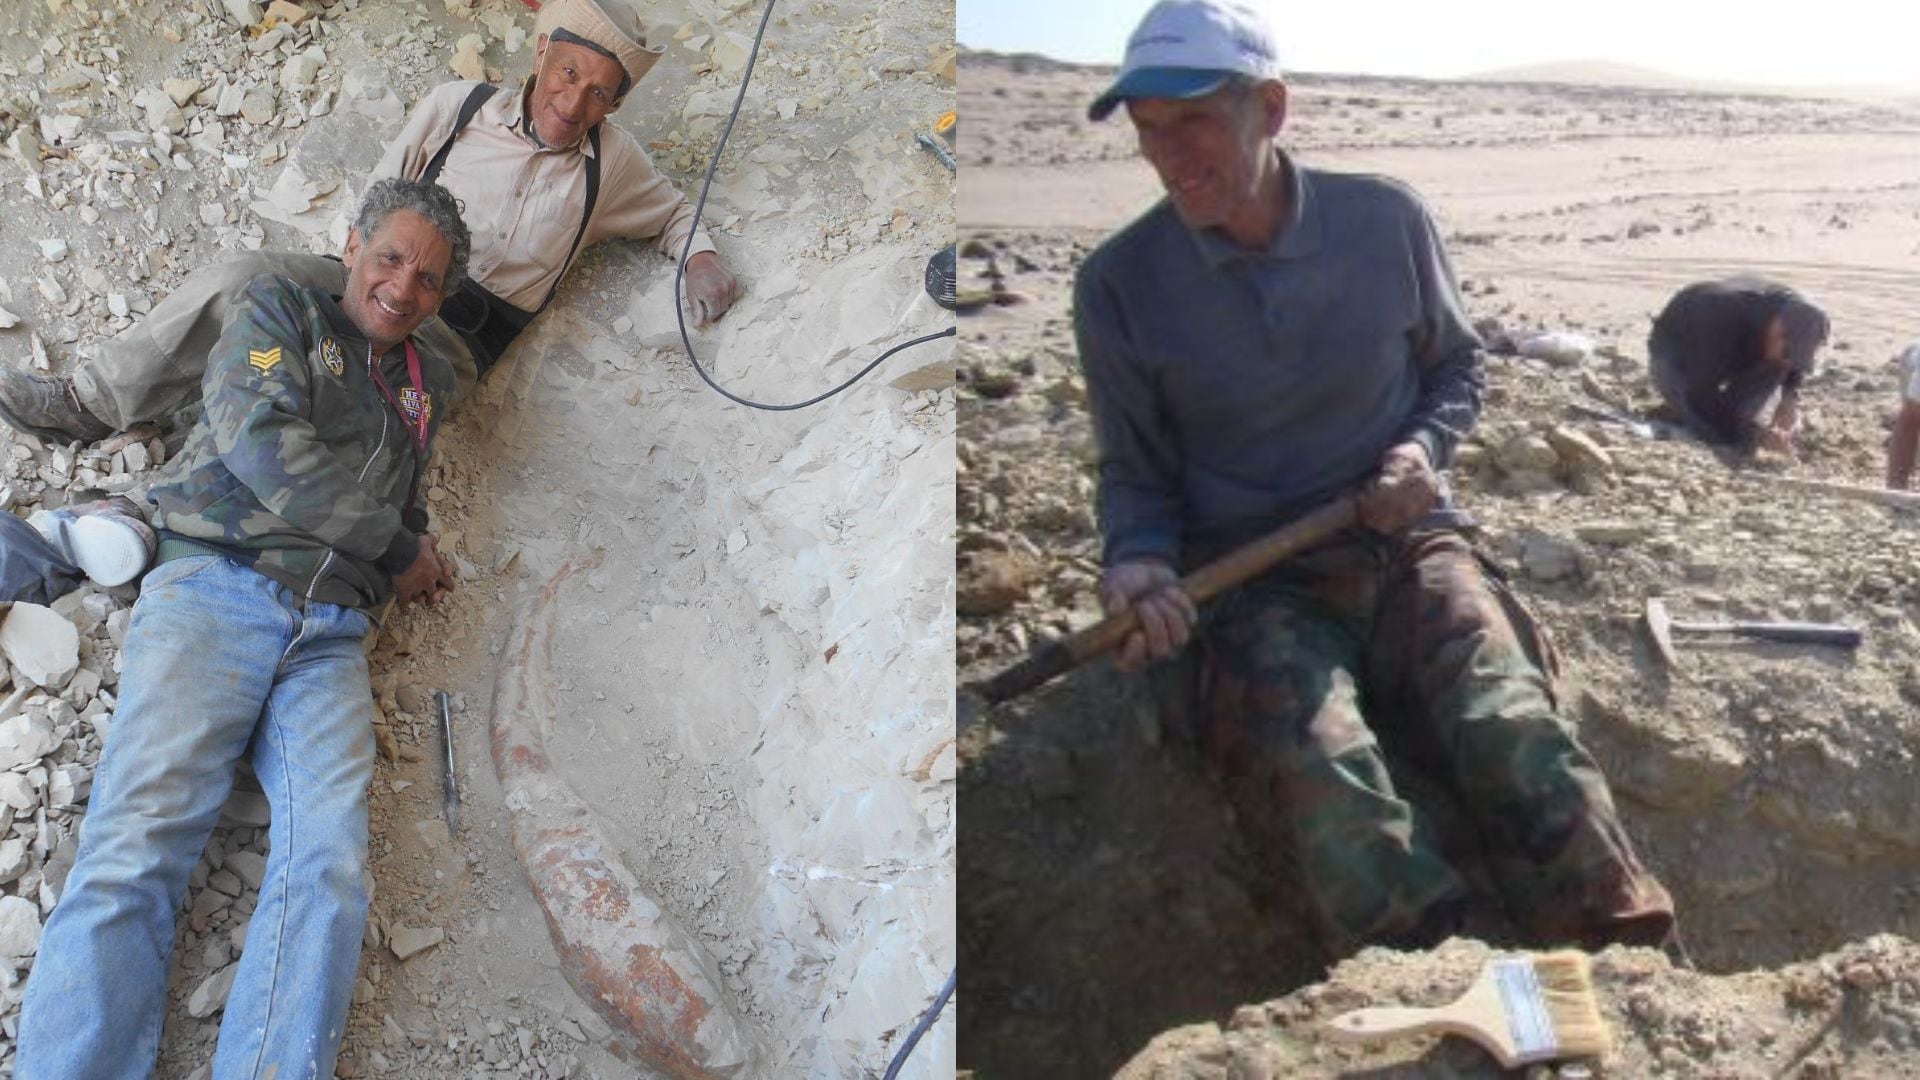 The images show renowned Peruvian paleontologist Mario Urpina in the middle of an excavation in the Ica Desert, where he discovers the world's largest animal fossil.  (Andean)